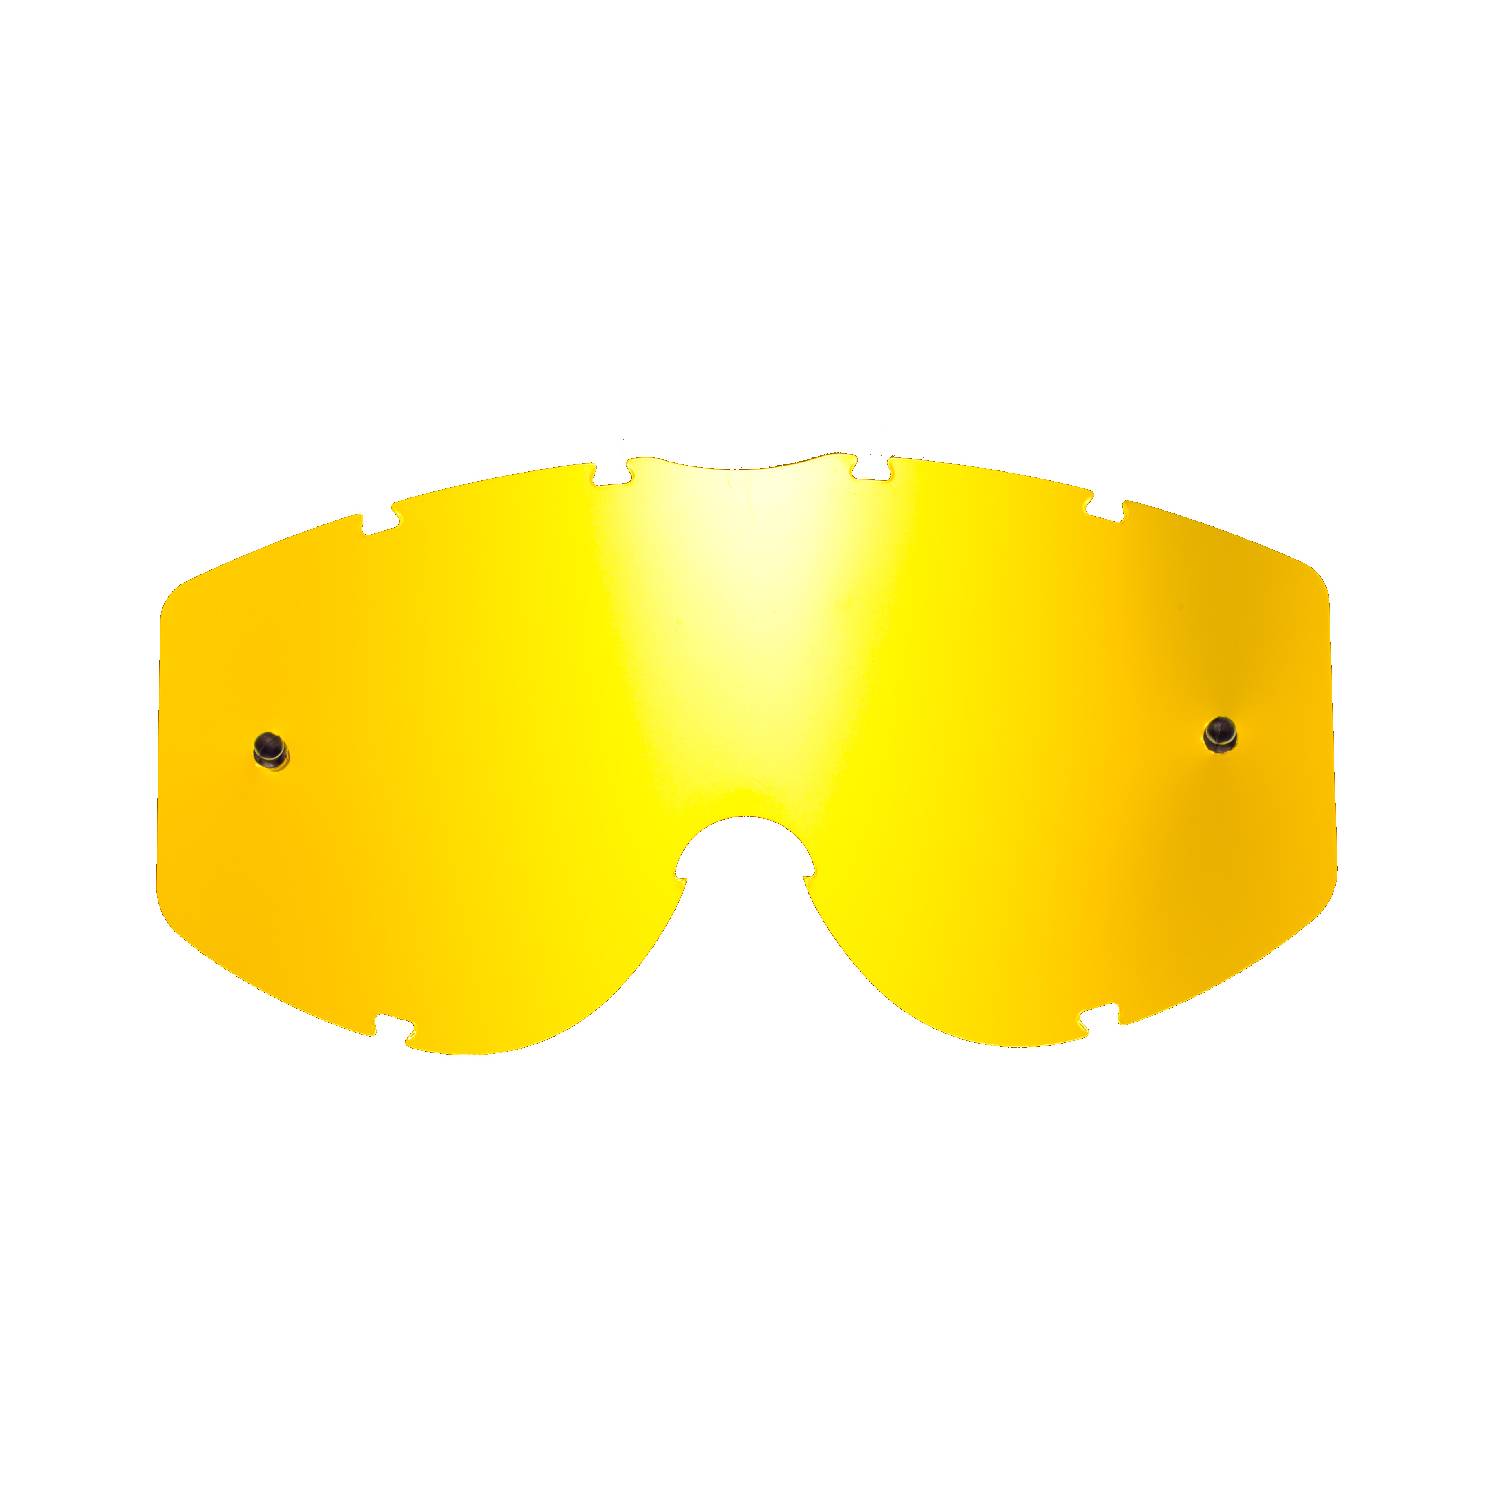 gold-toned mirrored replacement lenses for goggles compatible for  Progrip 3200 / 3450 / 3400  / 3201 / 3204 / 3301 goggle